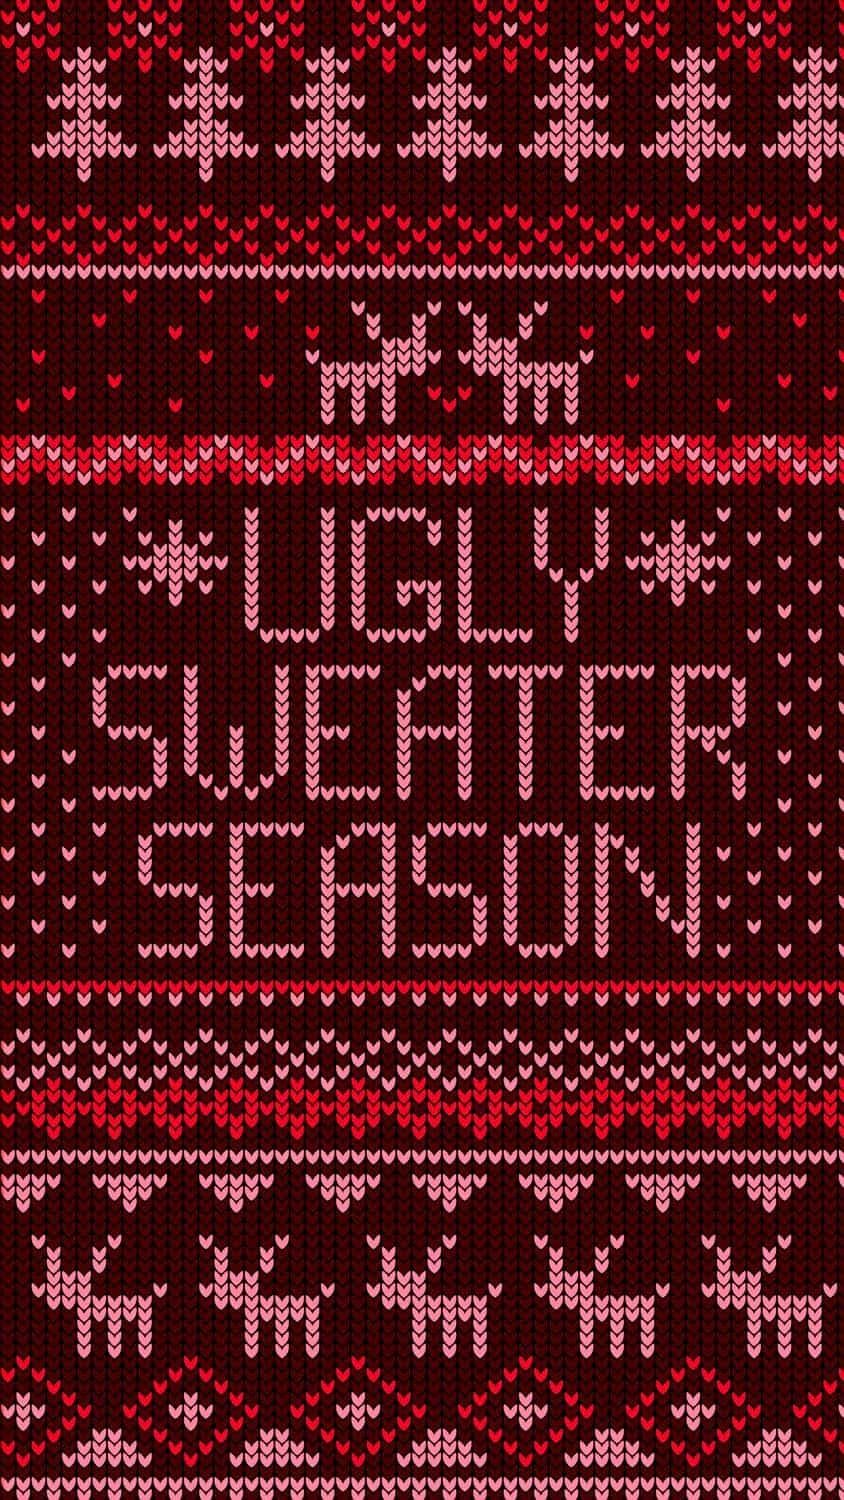 Ugly Sweater Season iPhone Wallpaper  iPhone Wallpapers